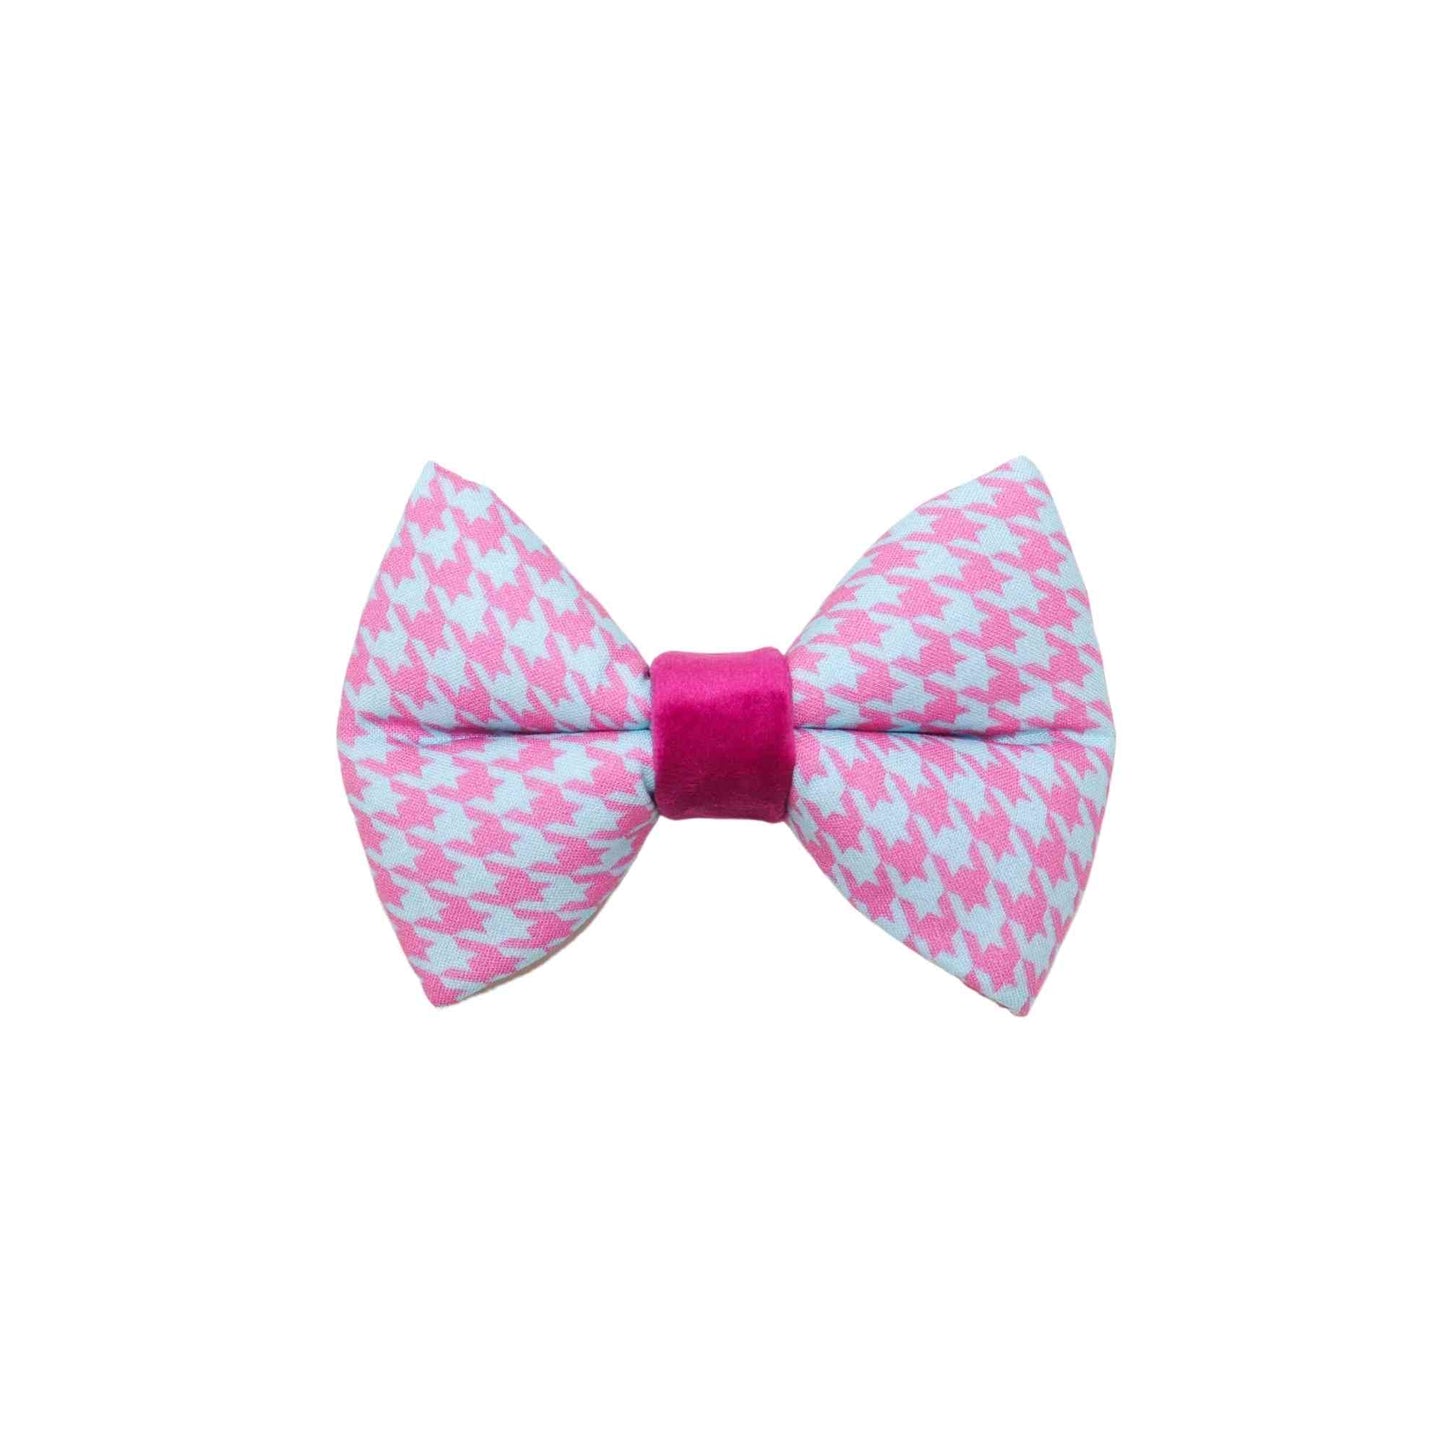 Make your furry friend stand out from the pack with our pink and blue houndstooth dog bow tie! Our bow tie is designed to fit over your pet's collar, with two elastic loops that keep it securely in place. Available in small, medium, large, and extra-large sizes, our bow tie is perfect for dogs of all breeds and sizes. The houndstooth pattern adds a touch of style to any outfit, whether it's for a special occasion or everyday wear. Shop now and give your furry friend a stylish accessory they'll love!